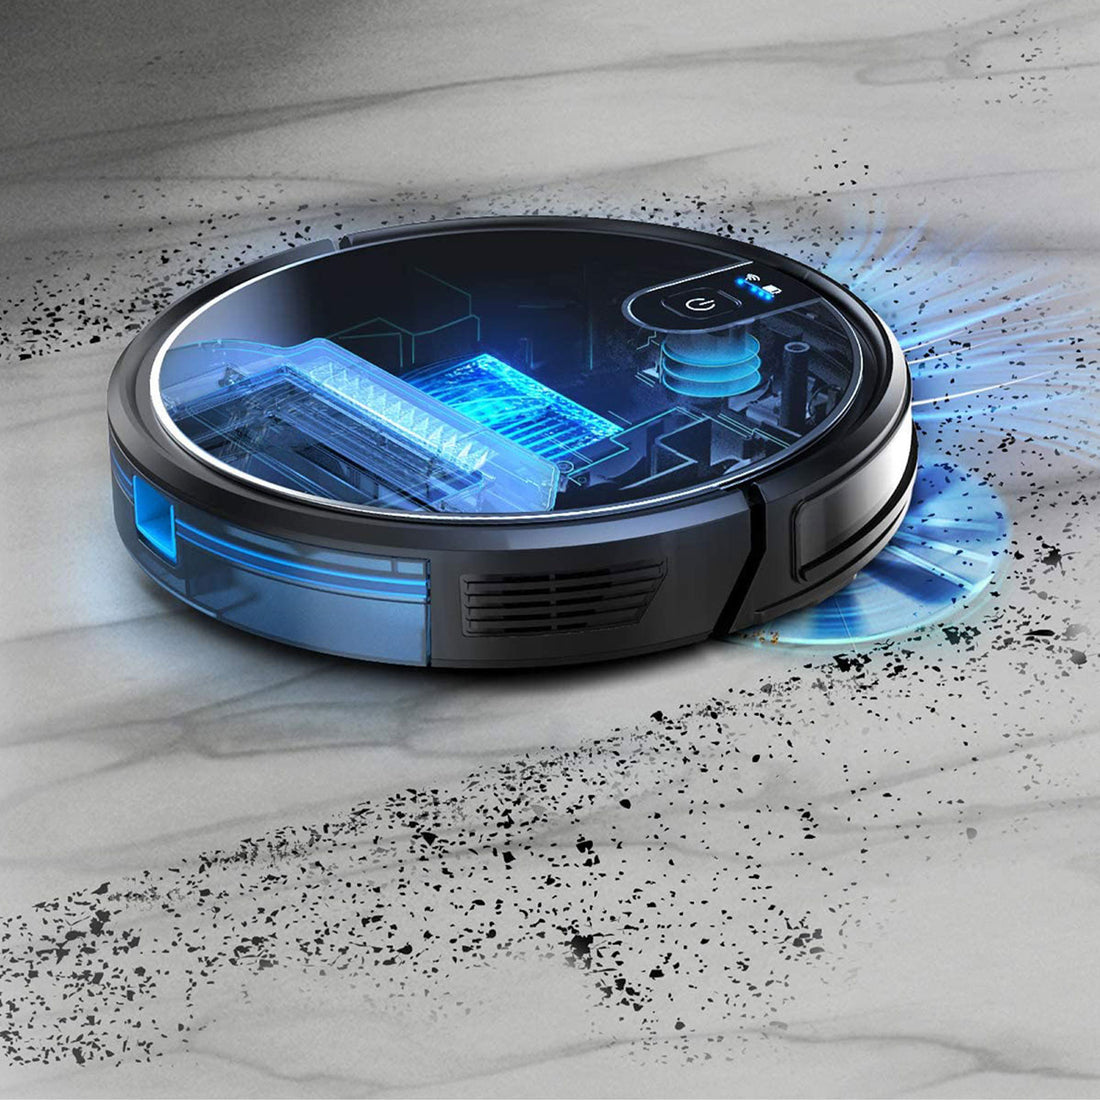 MyGenie XSonic Wifi Pro Robotic Vacuum Cleaner Carpet Wet Dry Mopping-Small Home Appliances-PEROZ Accessories